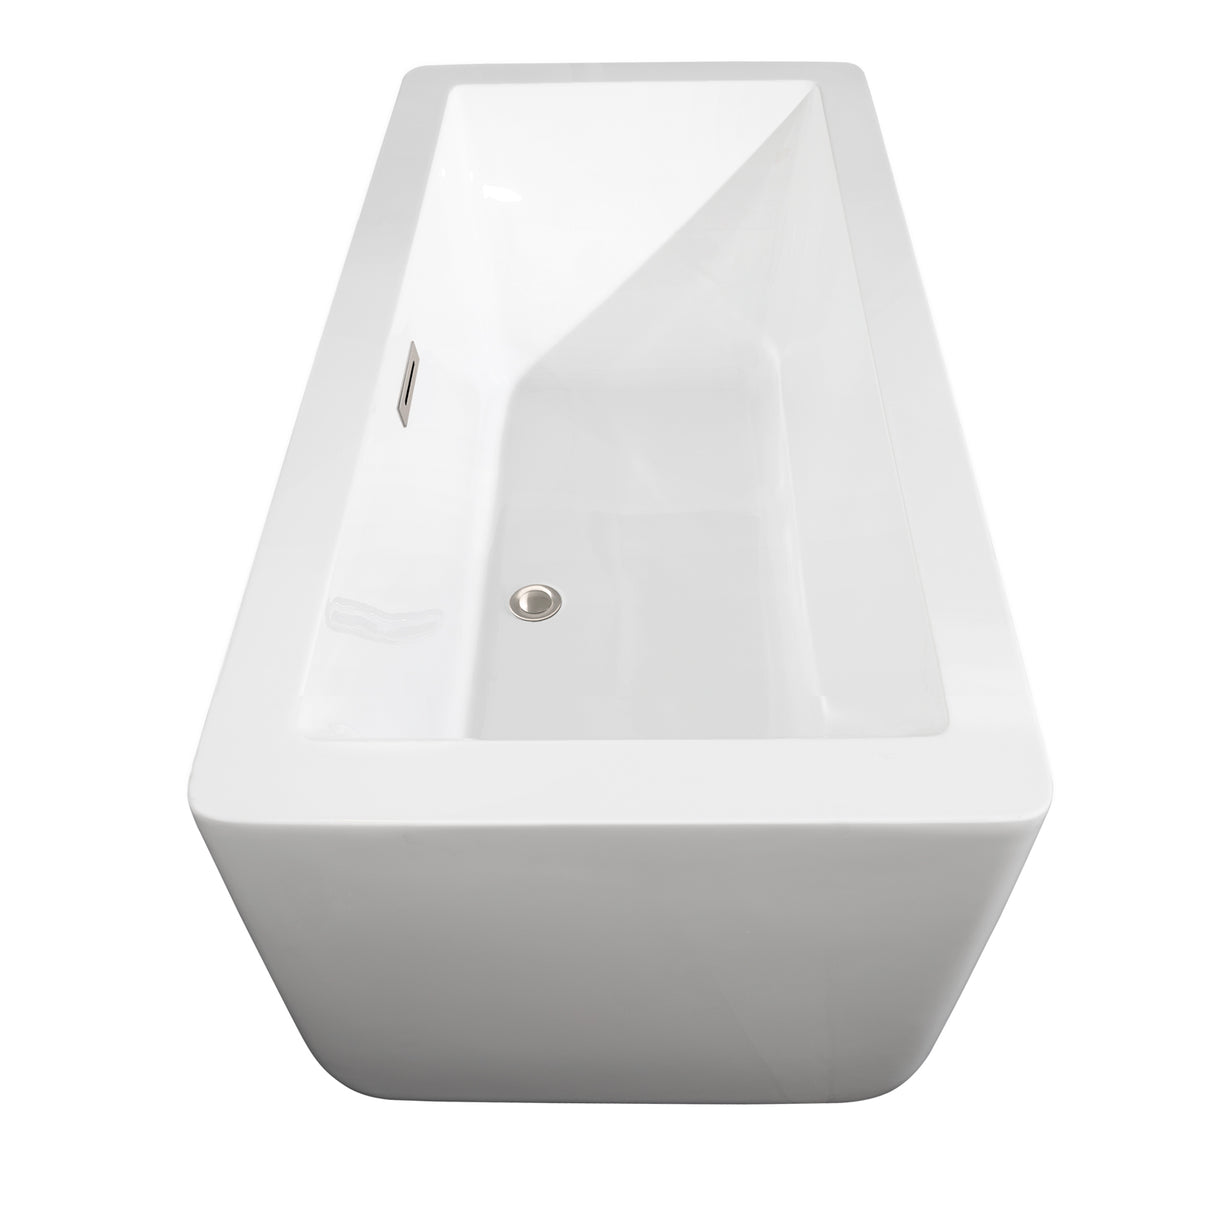 Laura 59 Inch Freestanding Bathtub in White with Brushed Nickel Drain and Overflow Trim